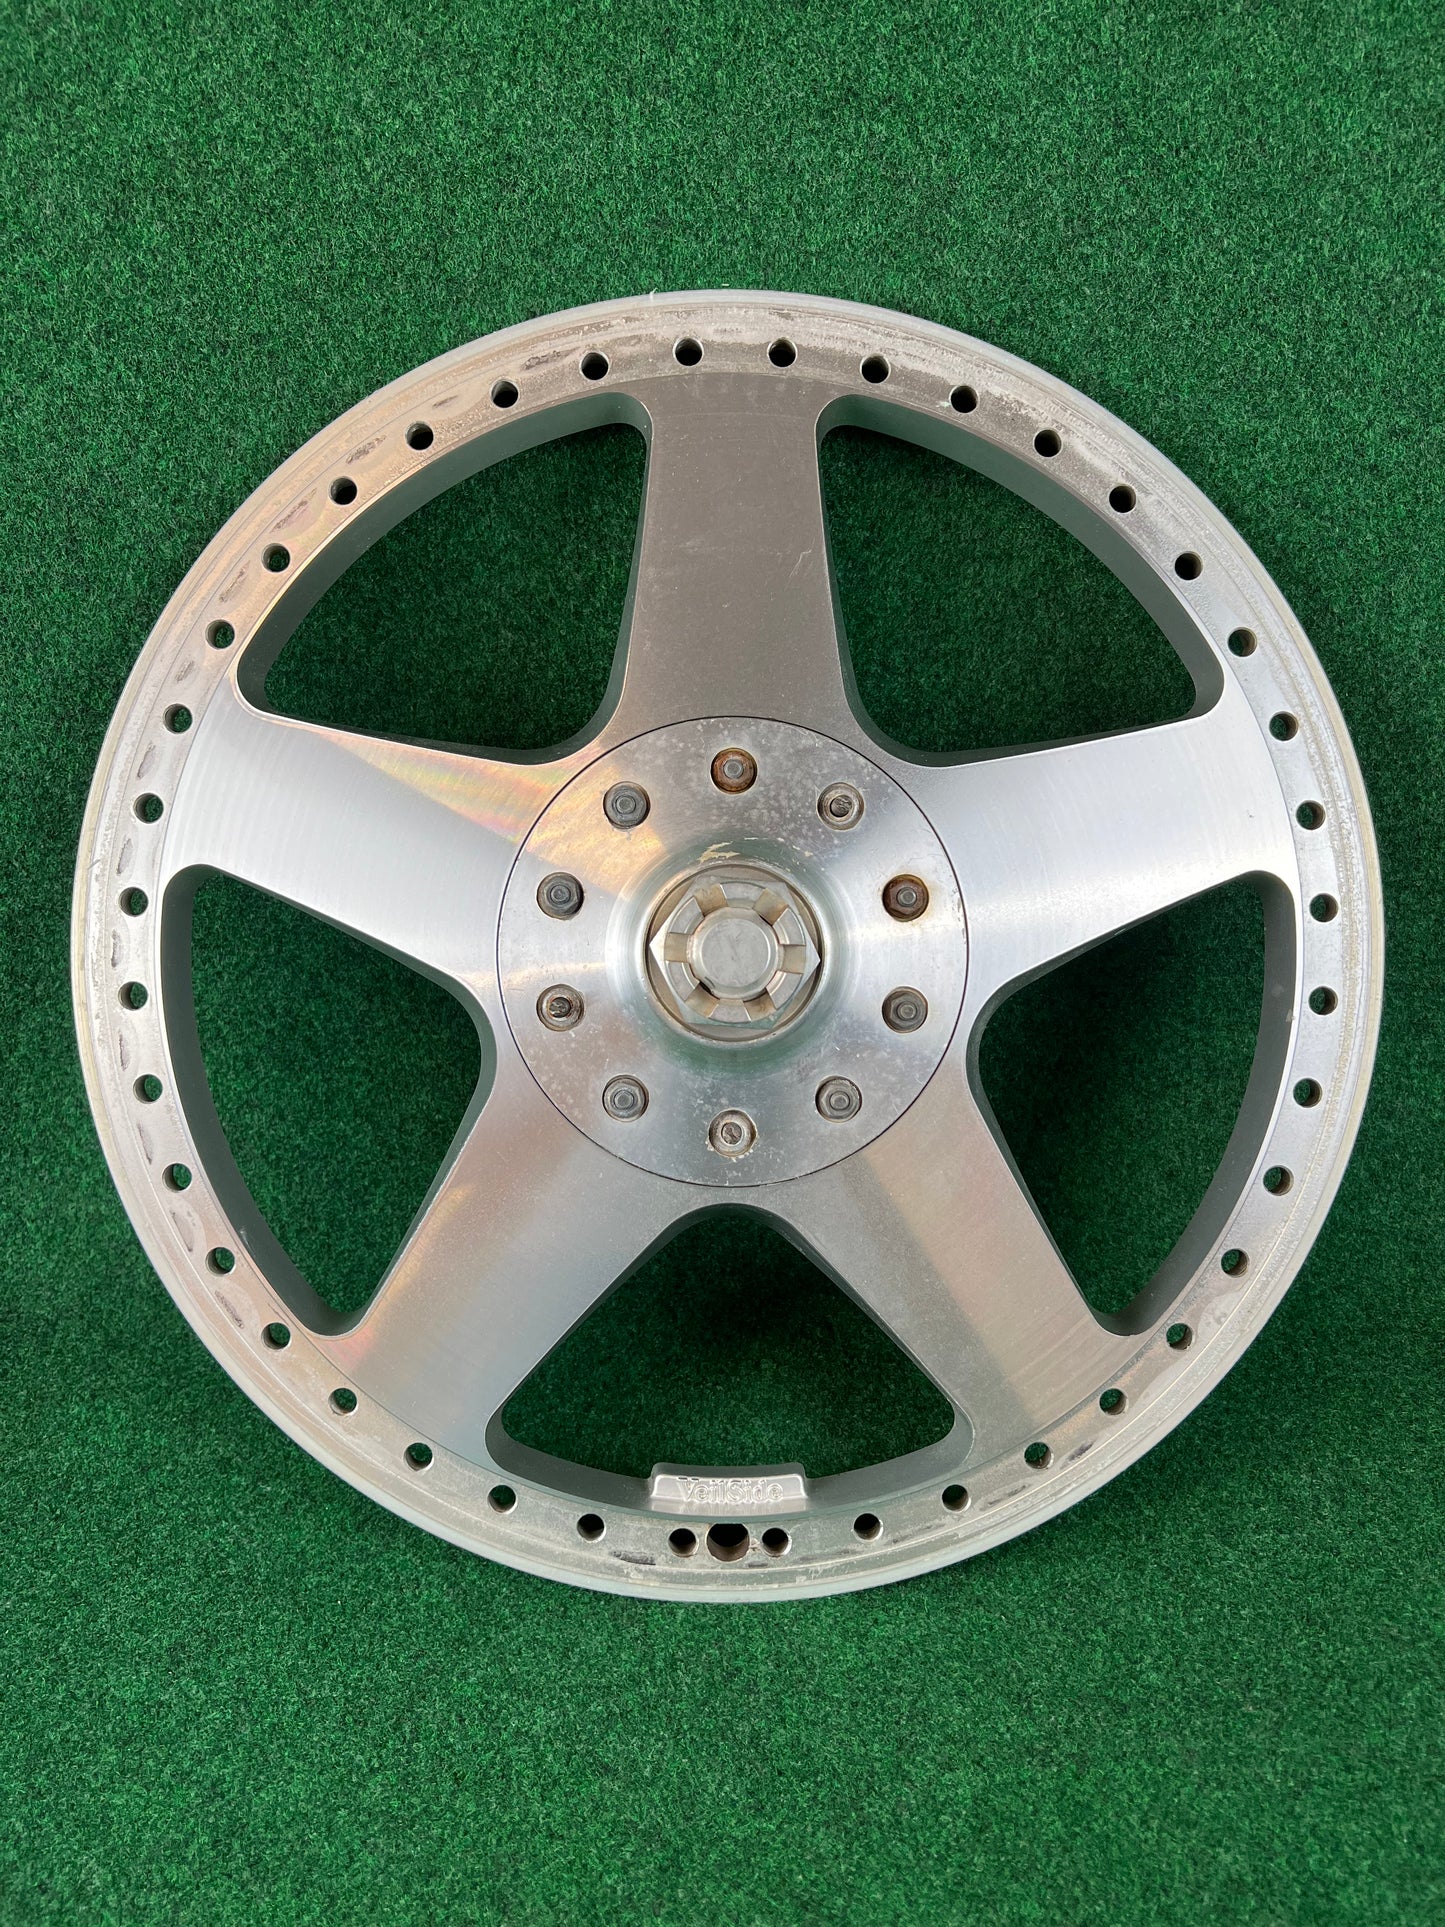 Veilside Andrew - 3 Piece Wheel Face with Center Cap for Wheel